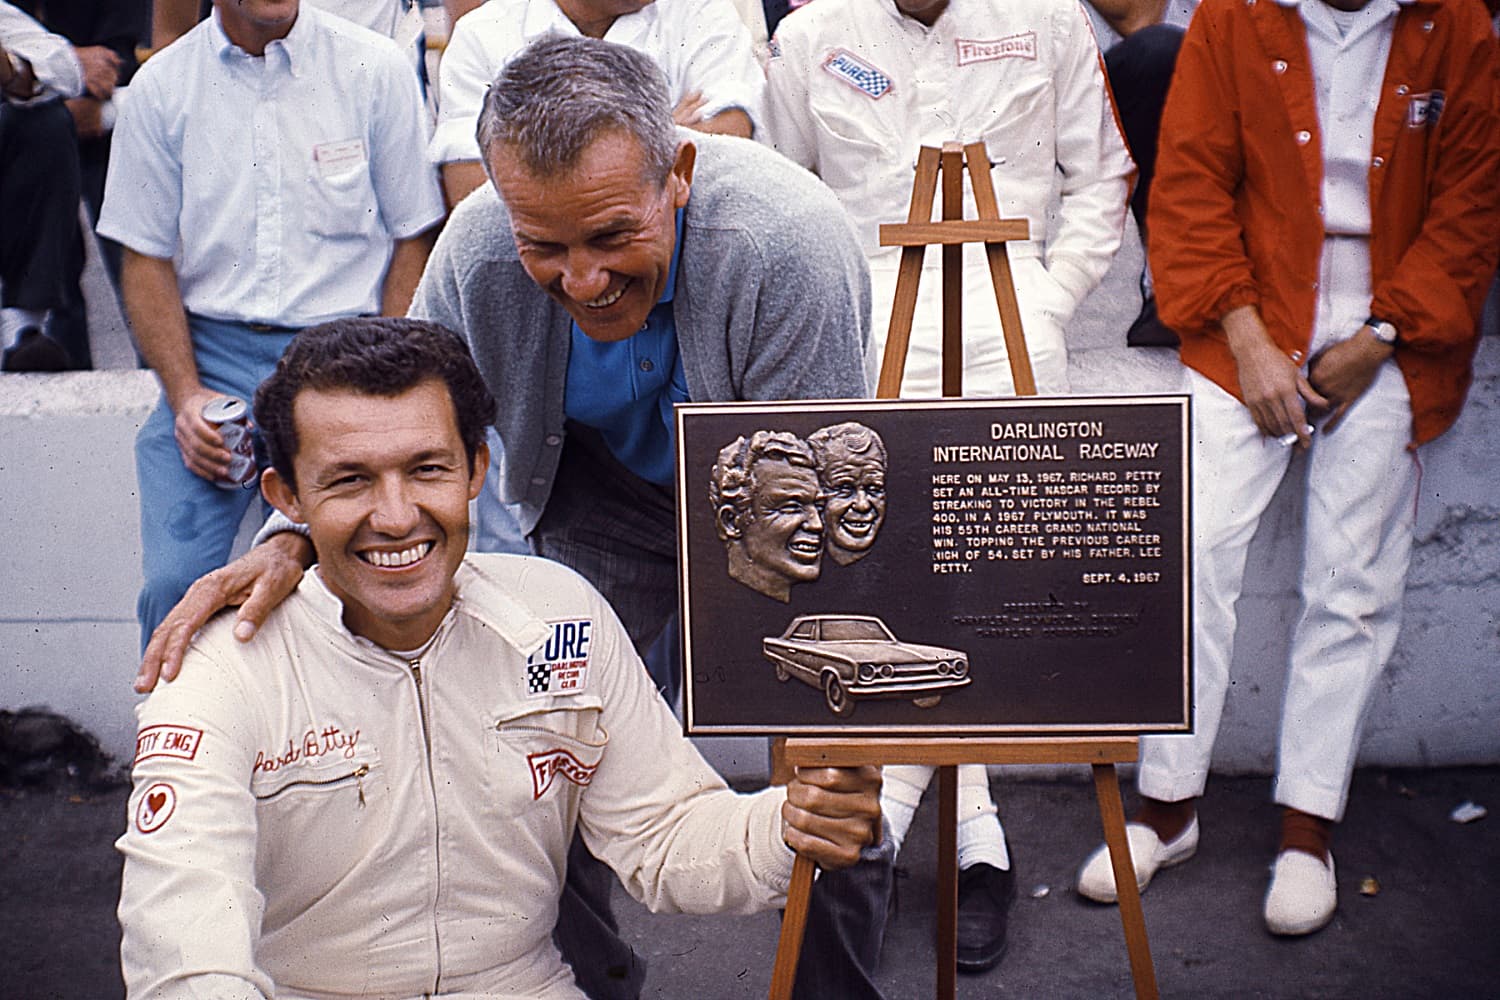 NASCAR’s Winningest Driver Before Richard Petty Was Someone ‘The King’ Knew Well